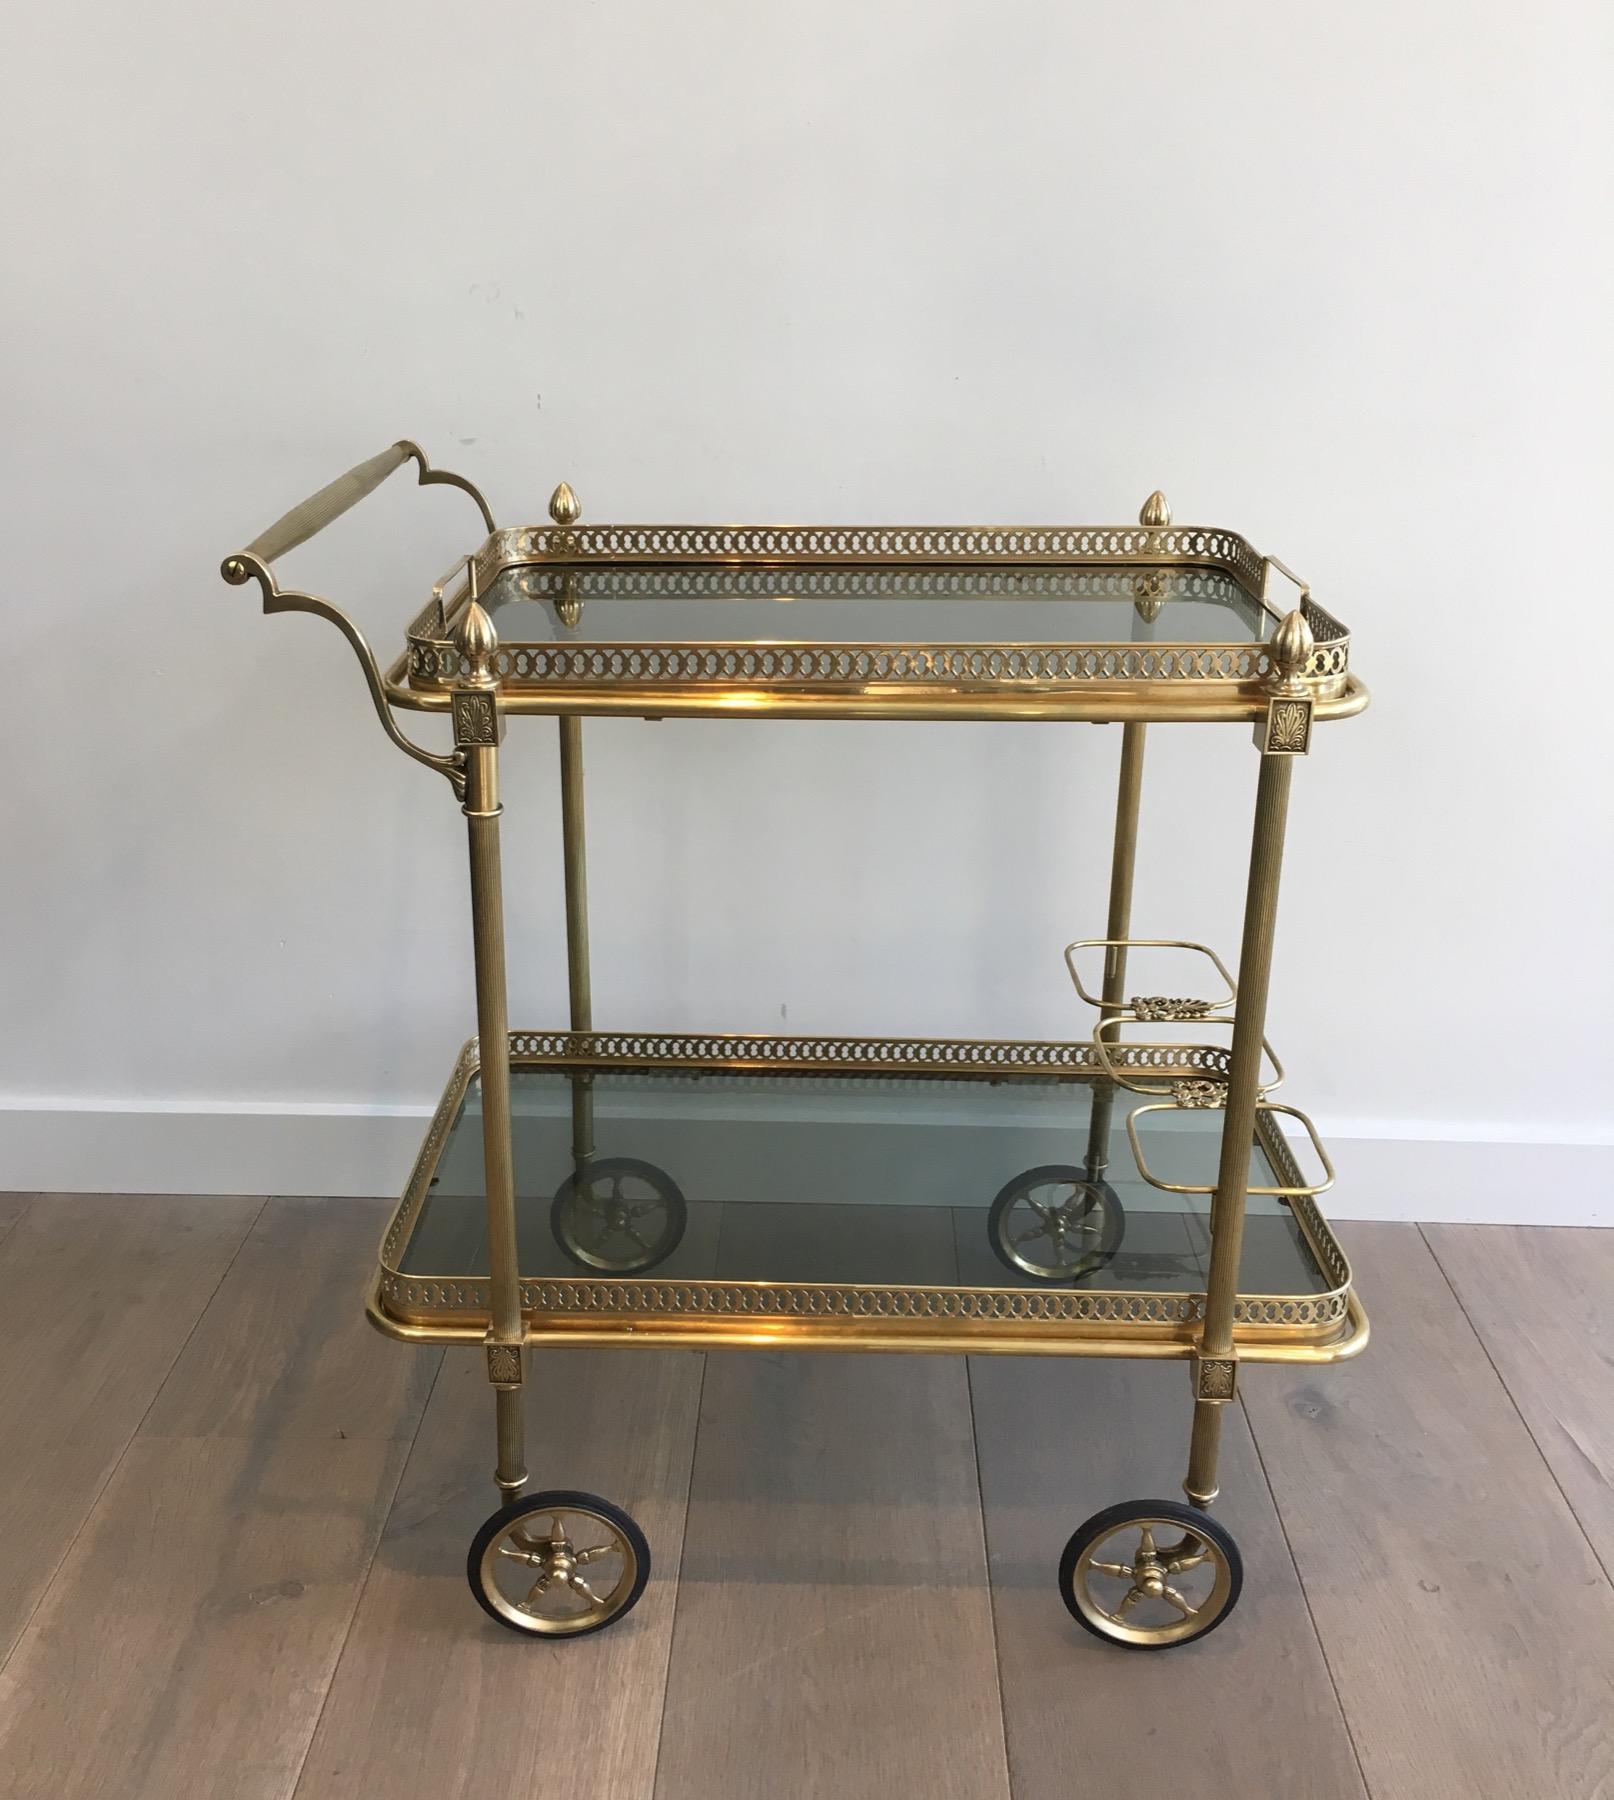 This very nice and elegant neoclassical style drinks trolley is made of brass with blueish glass shelves. Top tray is removable and can be used to present drinks, bottles or others. This is a French work by Maison Jansen. Circa 1940